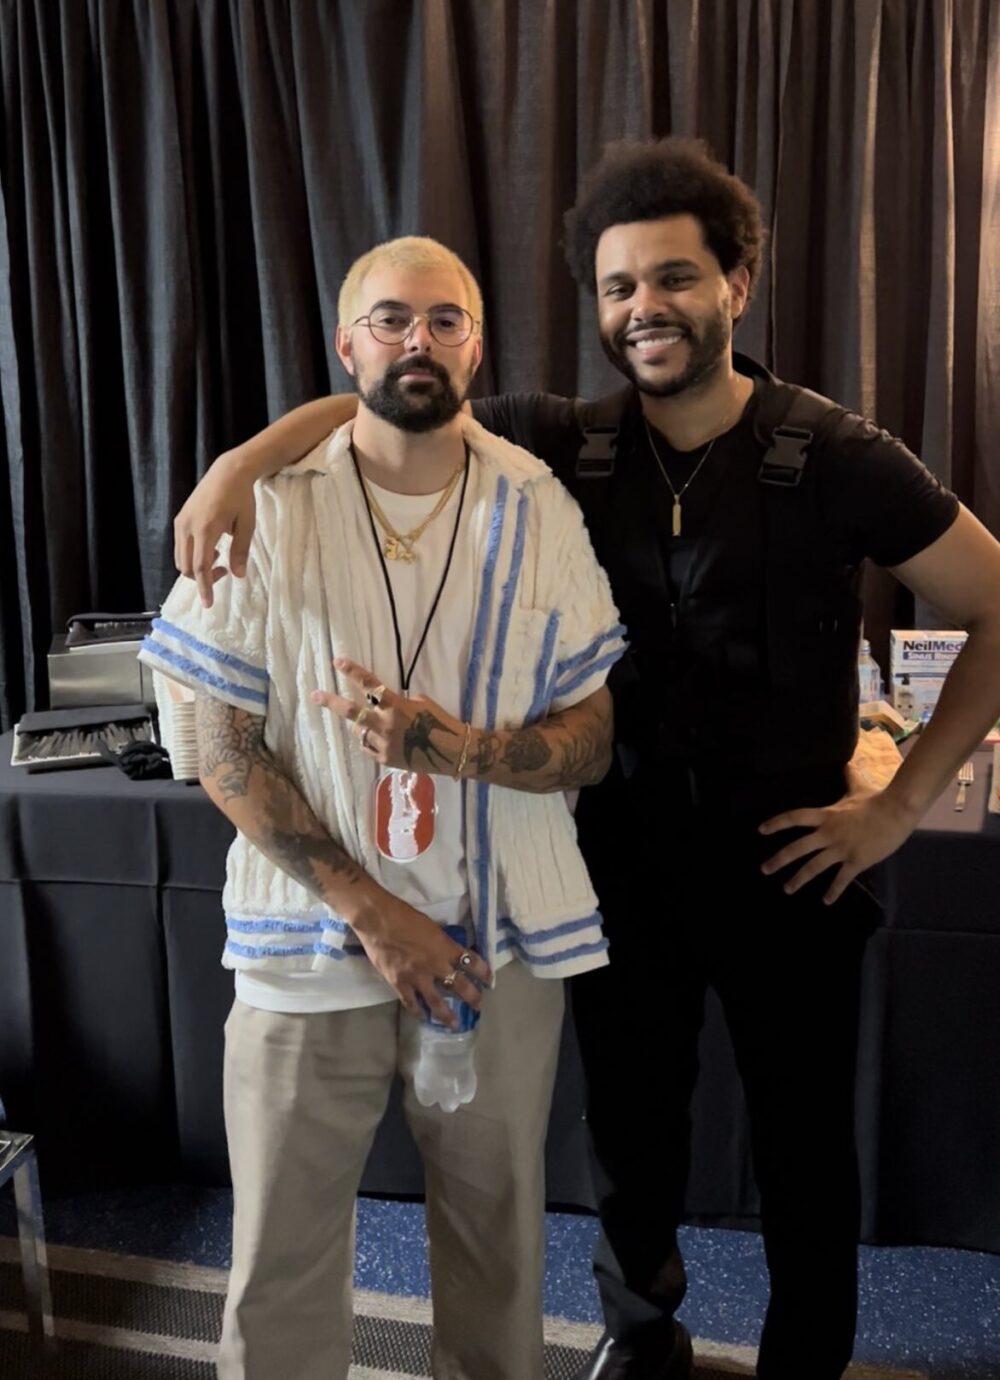 Fvckrender (left) with the Weeknd (right)